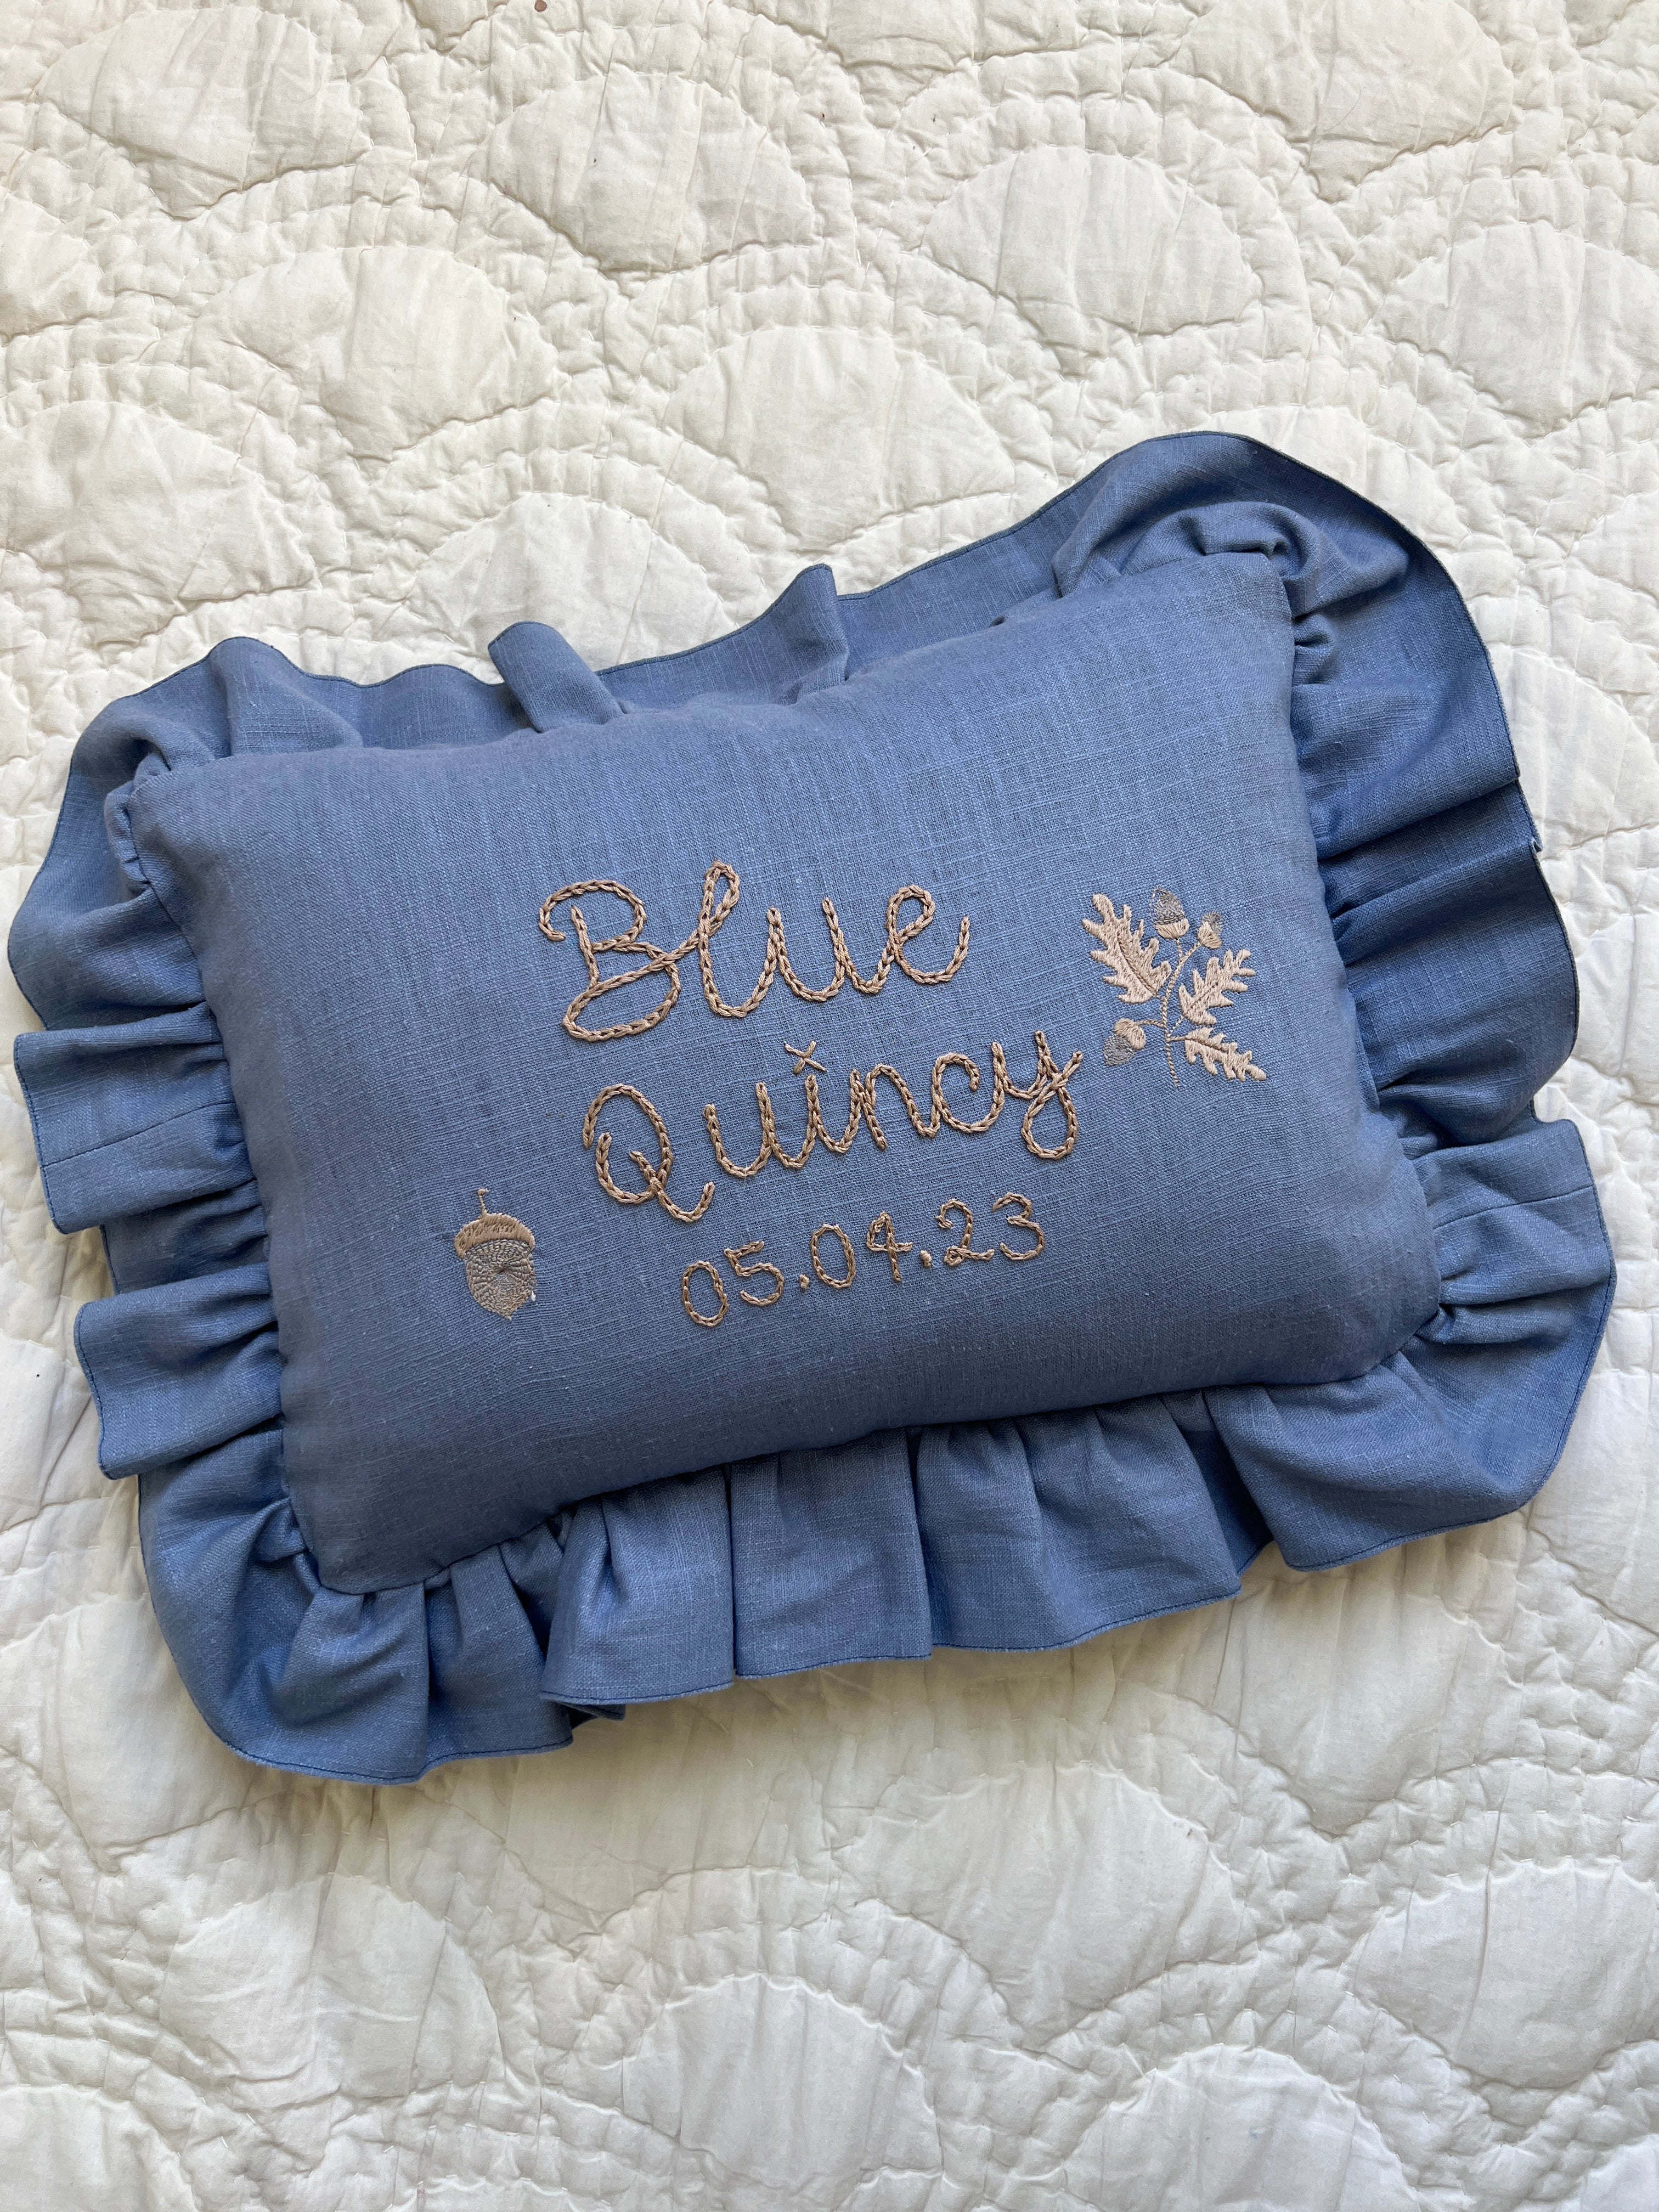 Heirloom Embroidered Baby Naming Cushion